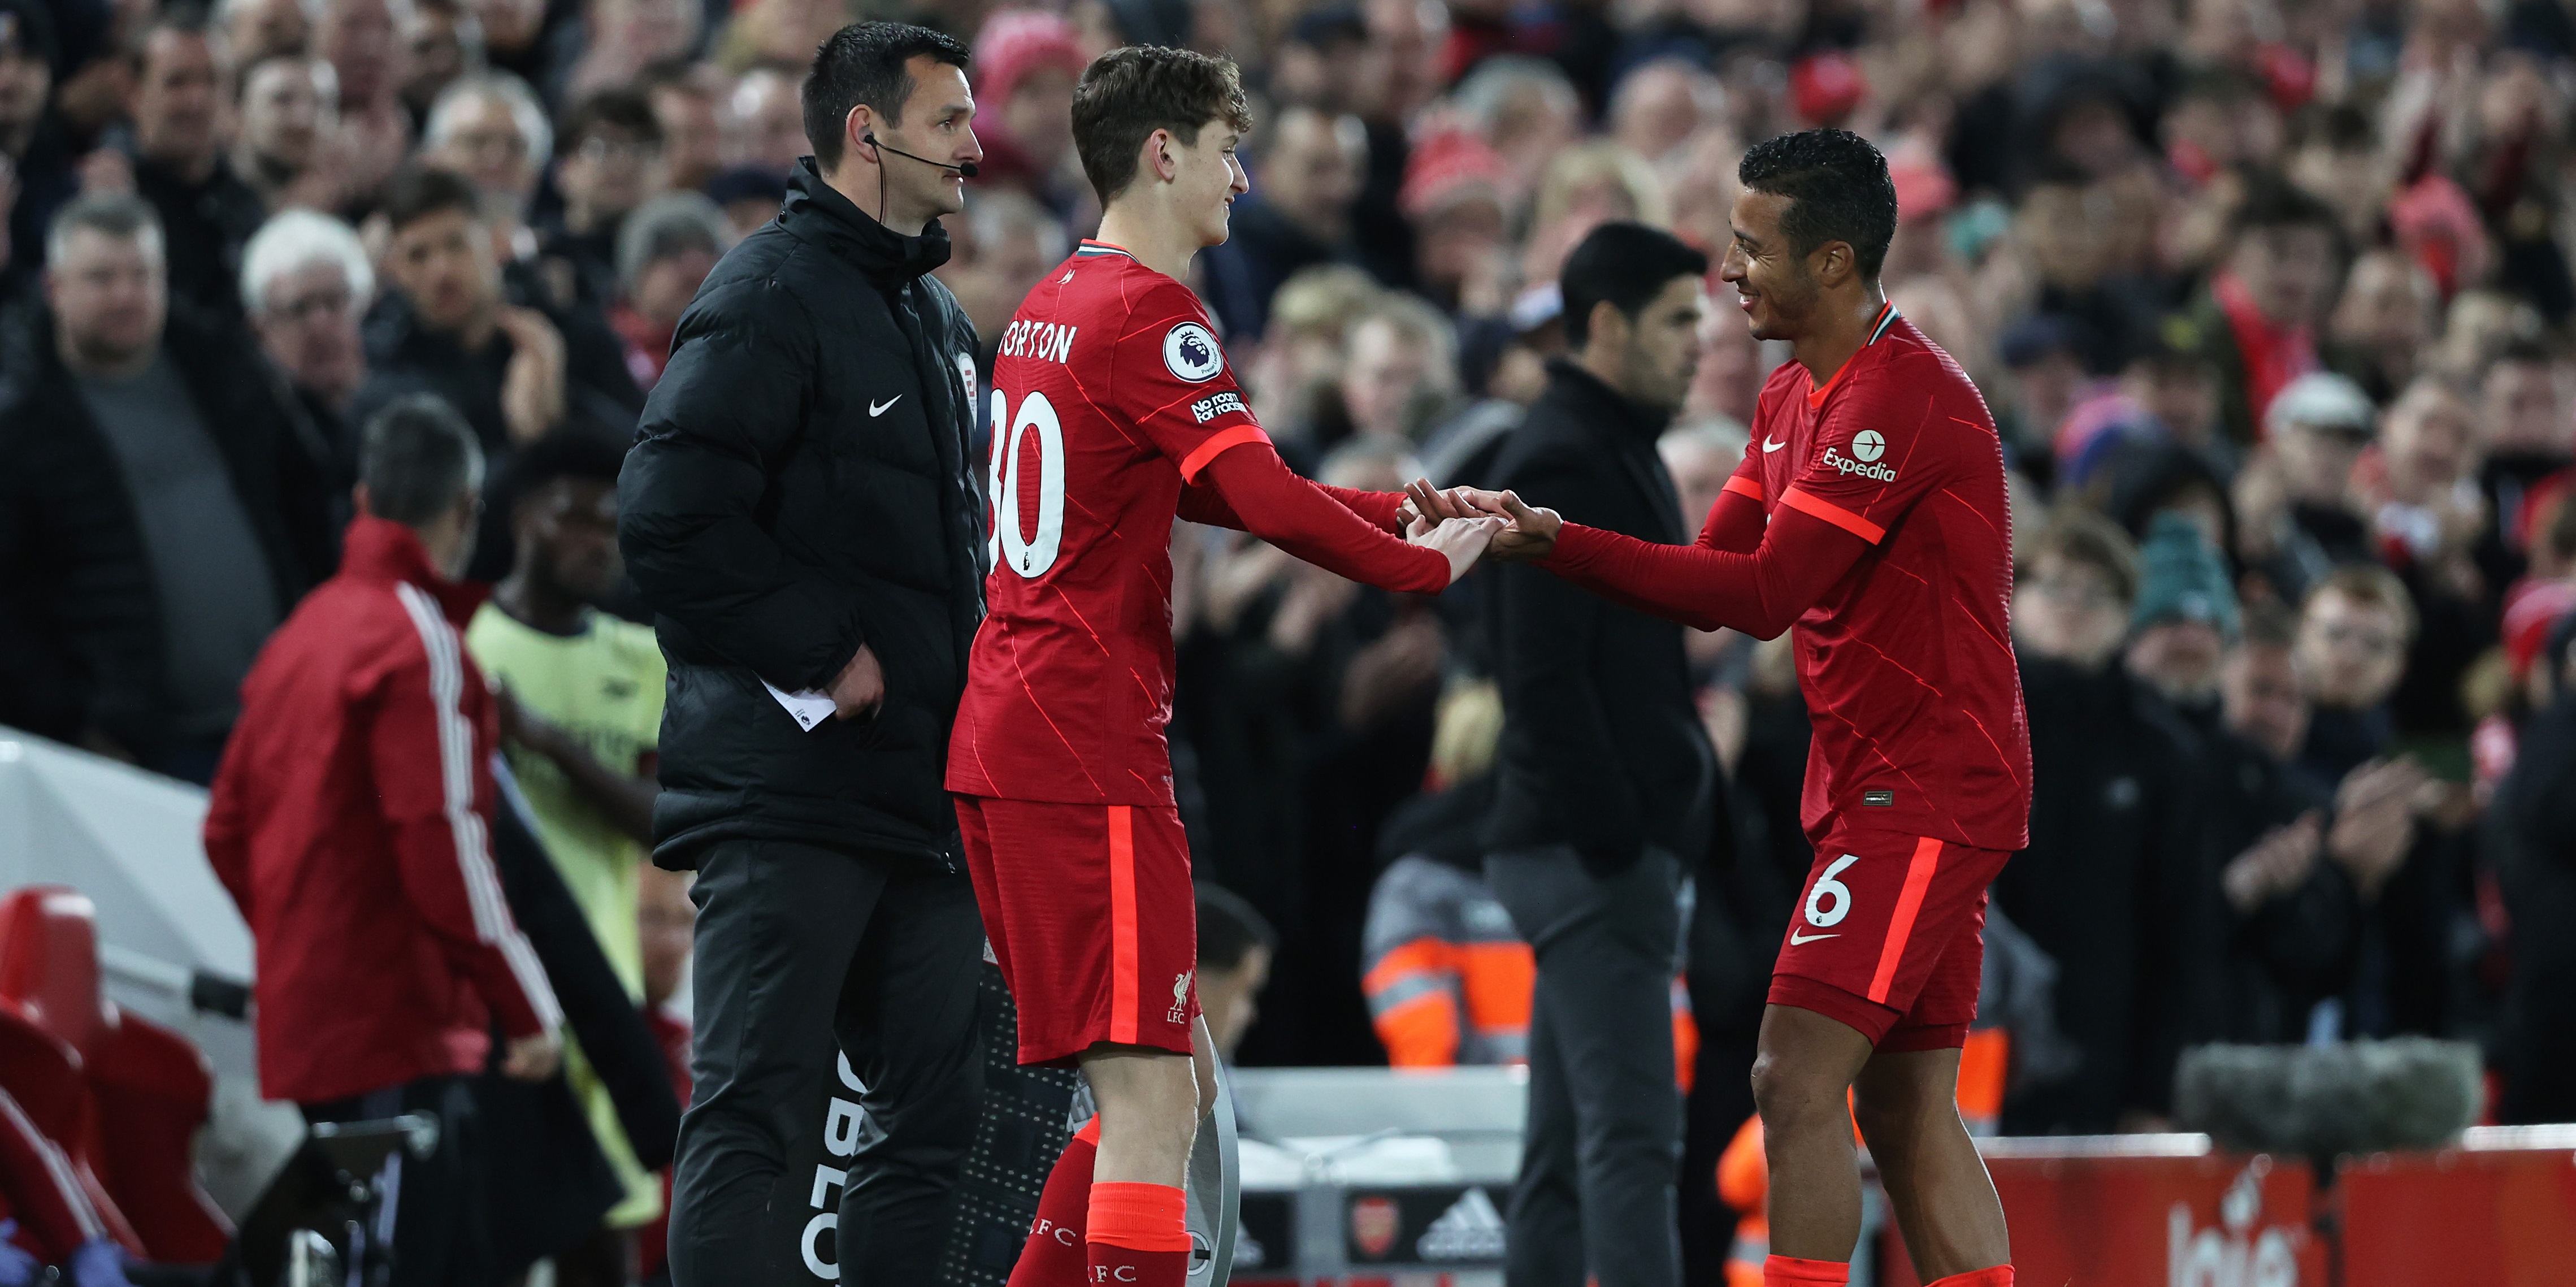 Liverpool predicted XI v Tottenham: 19-year-old makes full PL start as Klopp switches things around for London visit